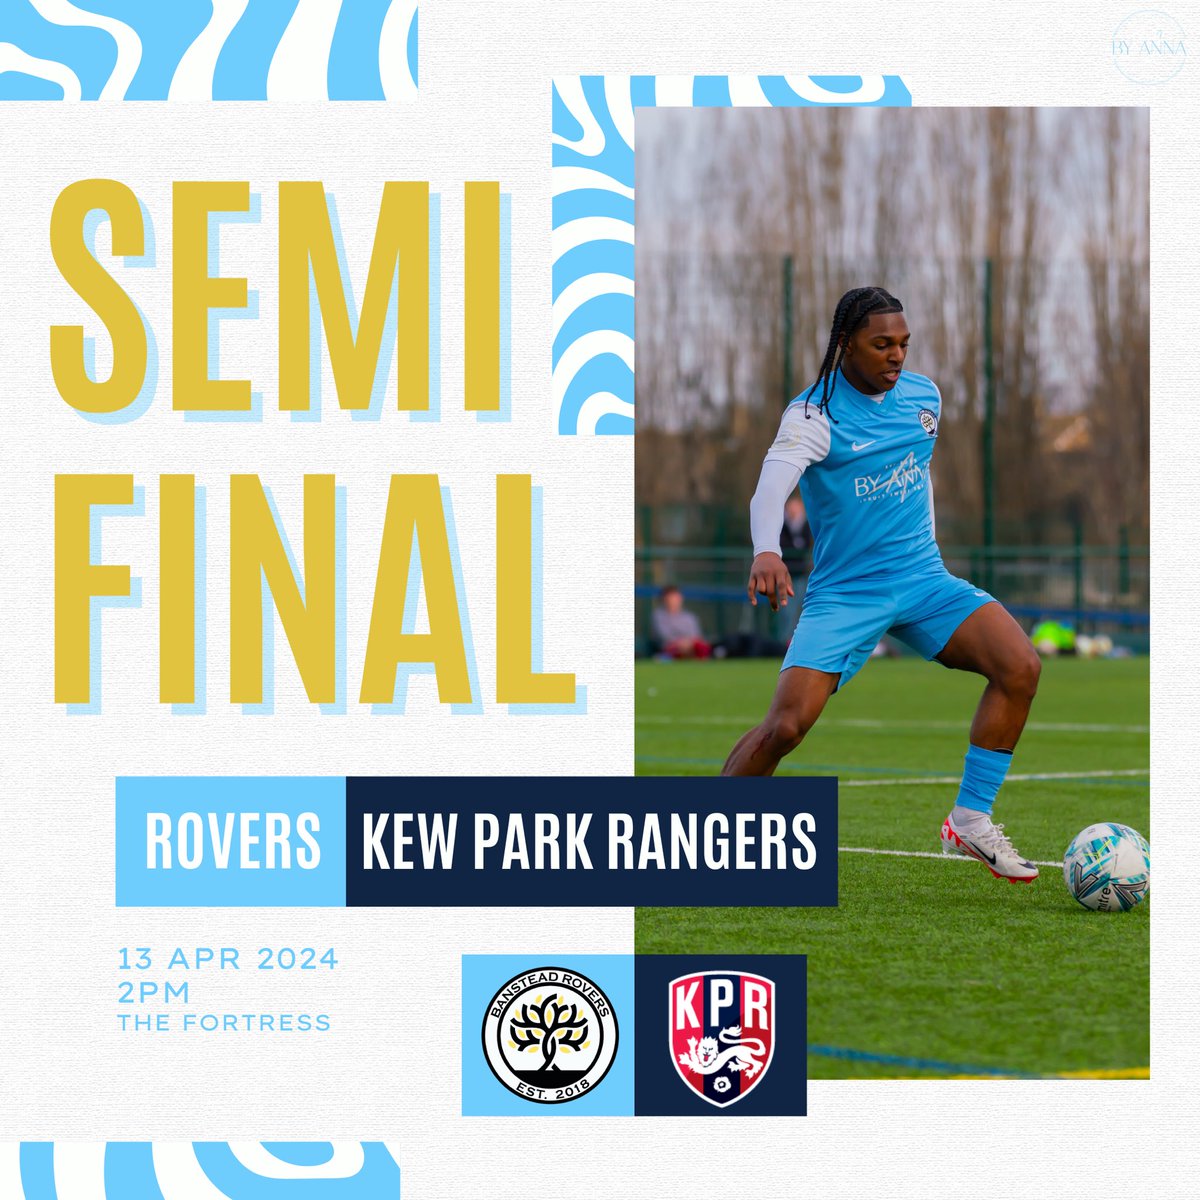 semi-final awaits. 👀 📆 Saturday 13 April 🆚 @KPRfootballclub ⏰ 2:00PM 📍 The Fortress, KT19 9JW Get down and support the #Rovers to help us get over the line!🏆 #UTR